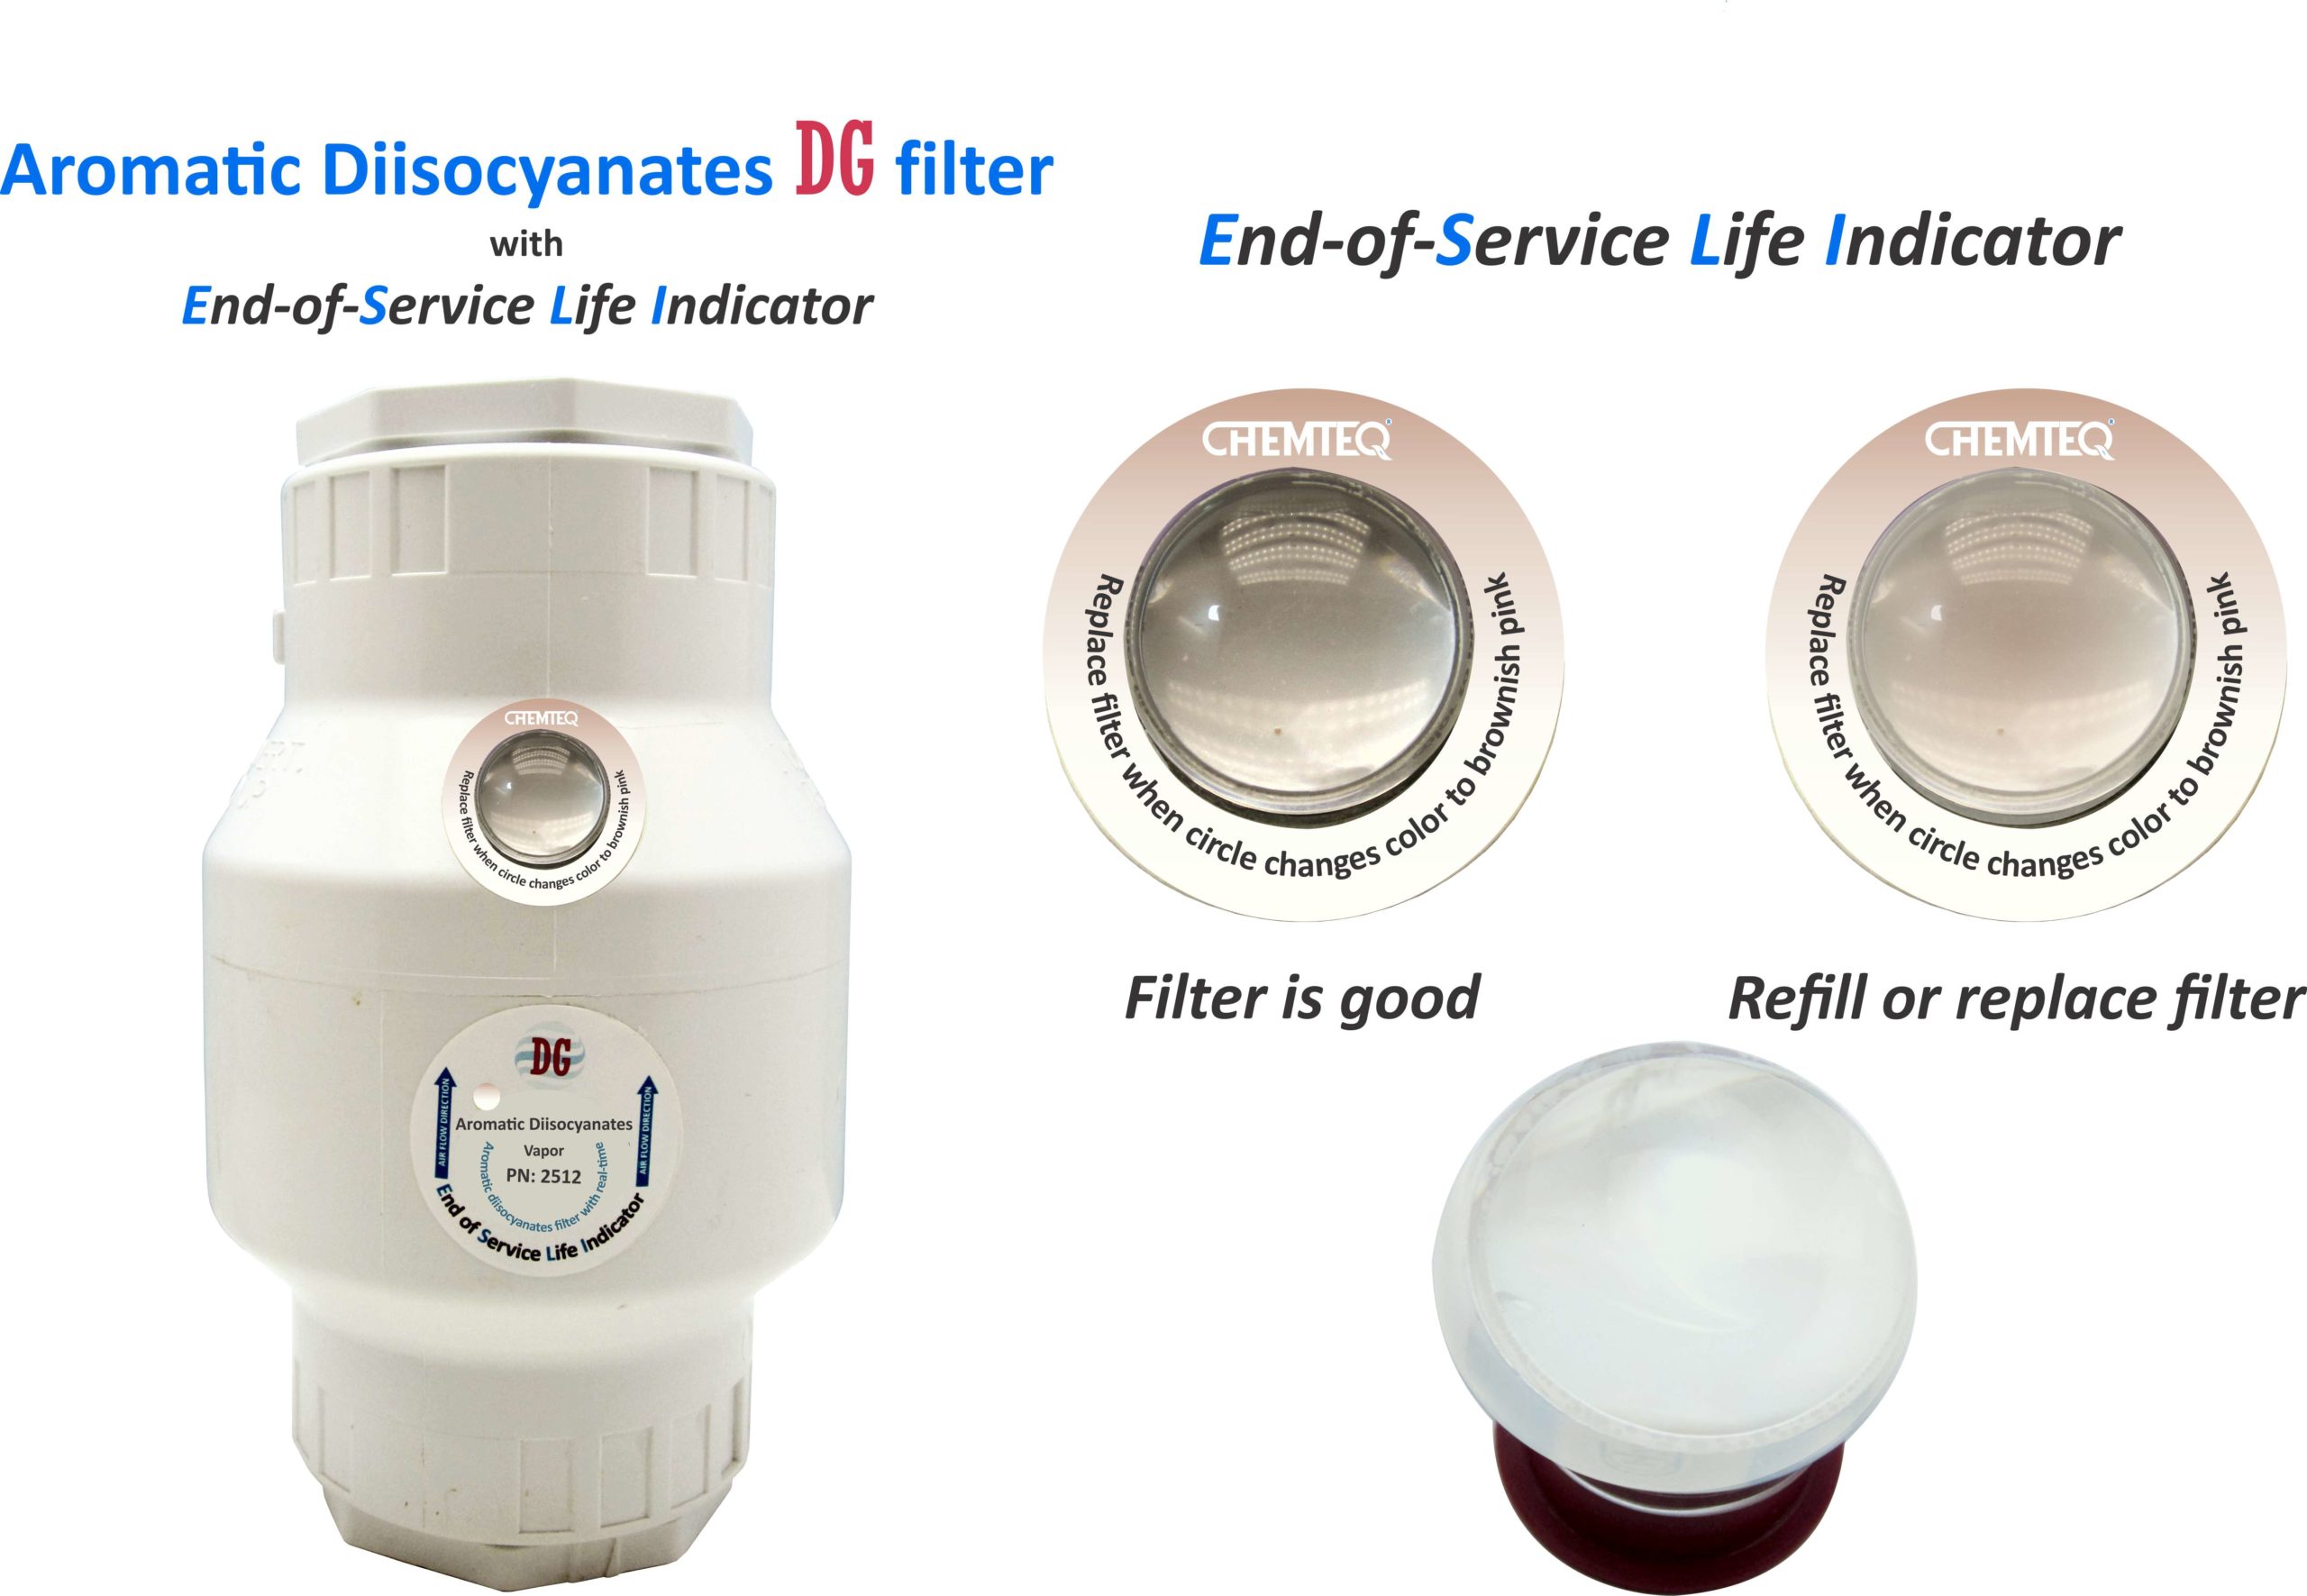 Aromatic Diisocyanates Filter with end of service life indicator for chemical processes and reactor vents